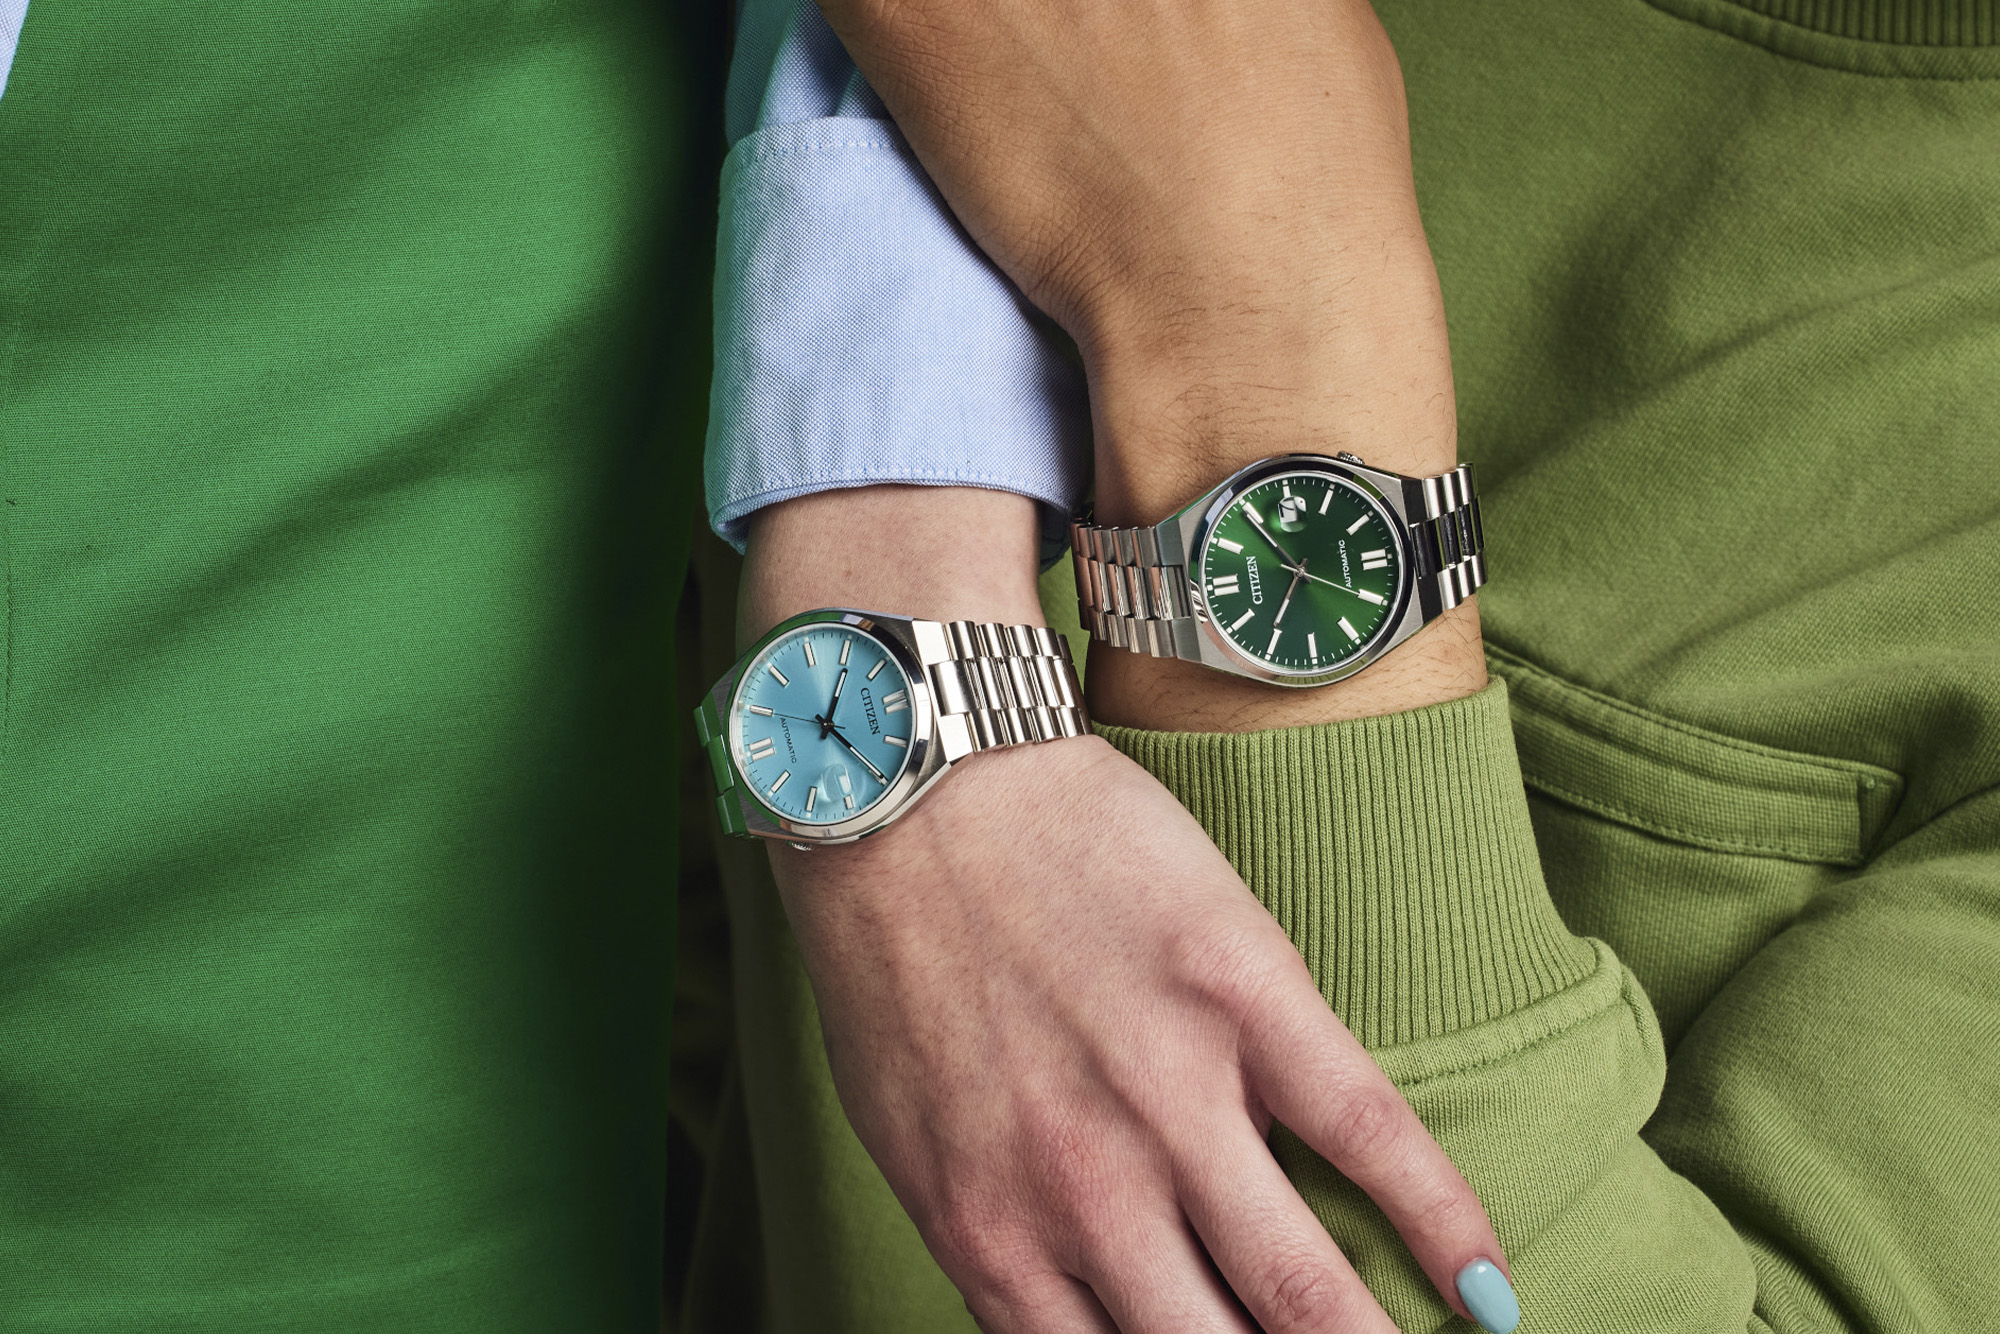 Citizen NJ015 Automatic Series “Tsuyosa” modelled in green and blue on wrists